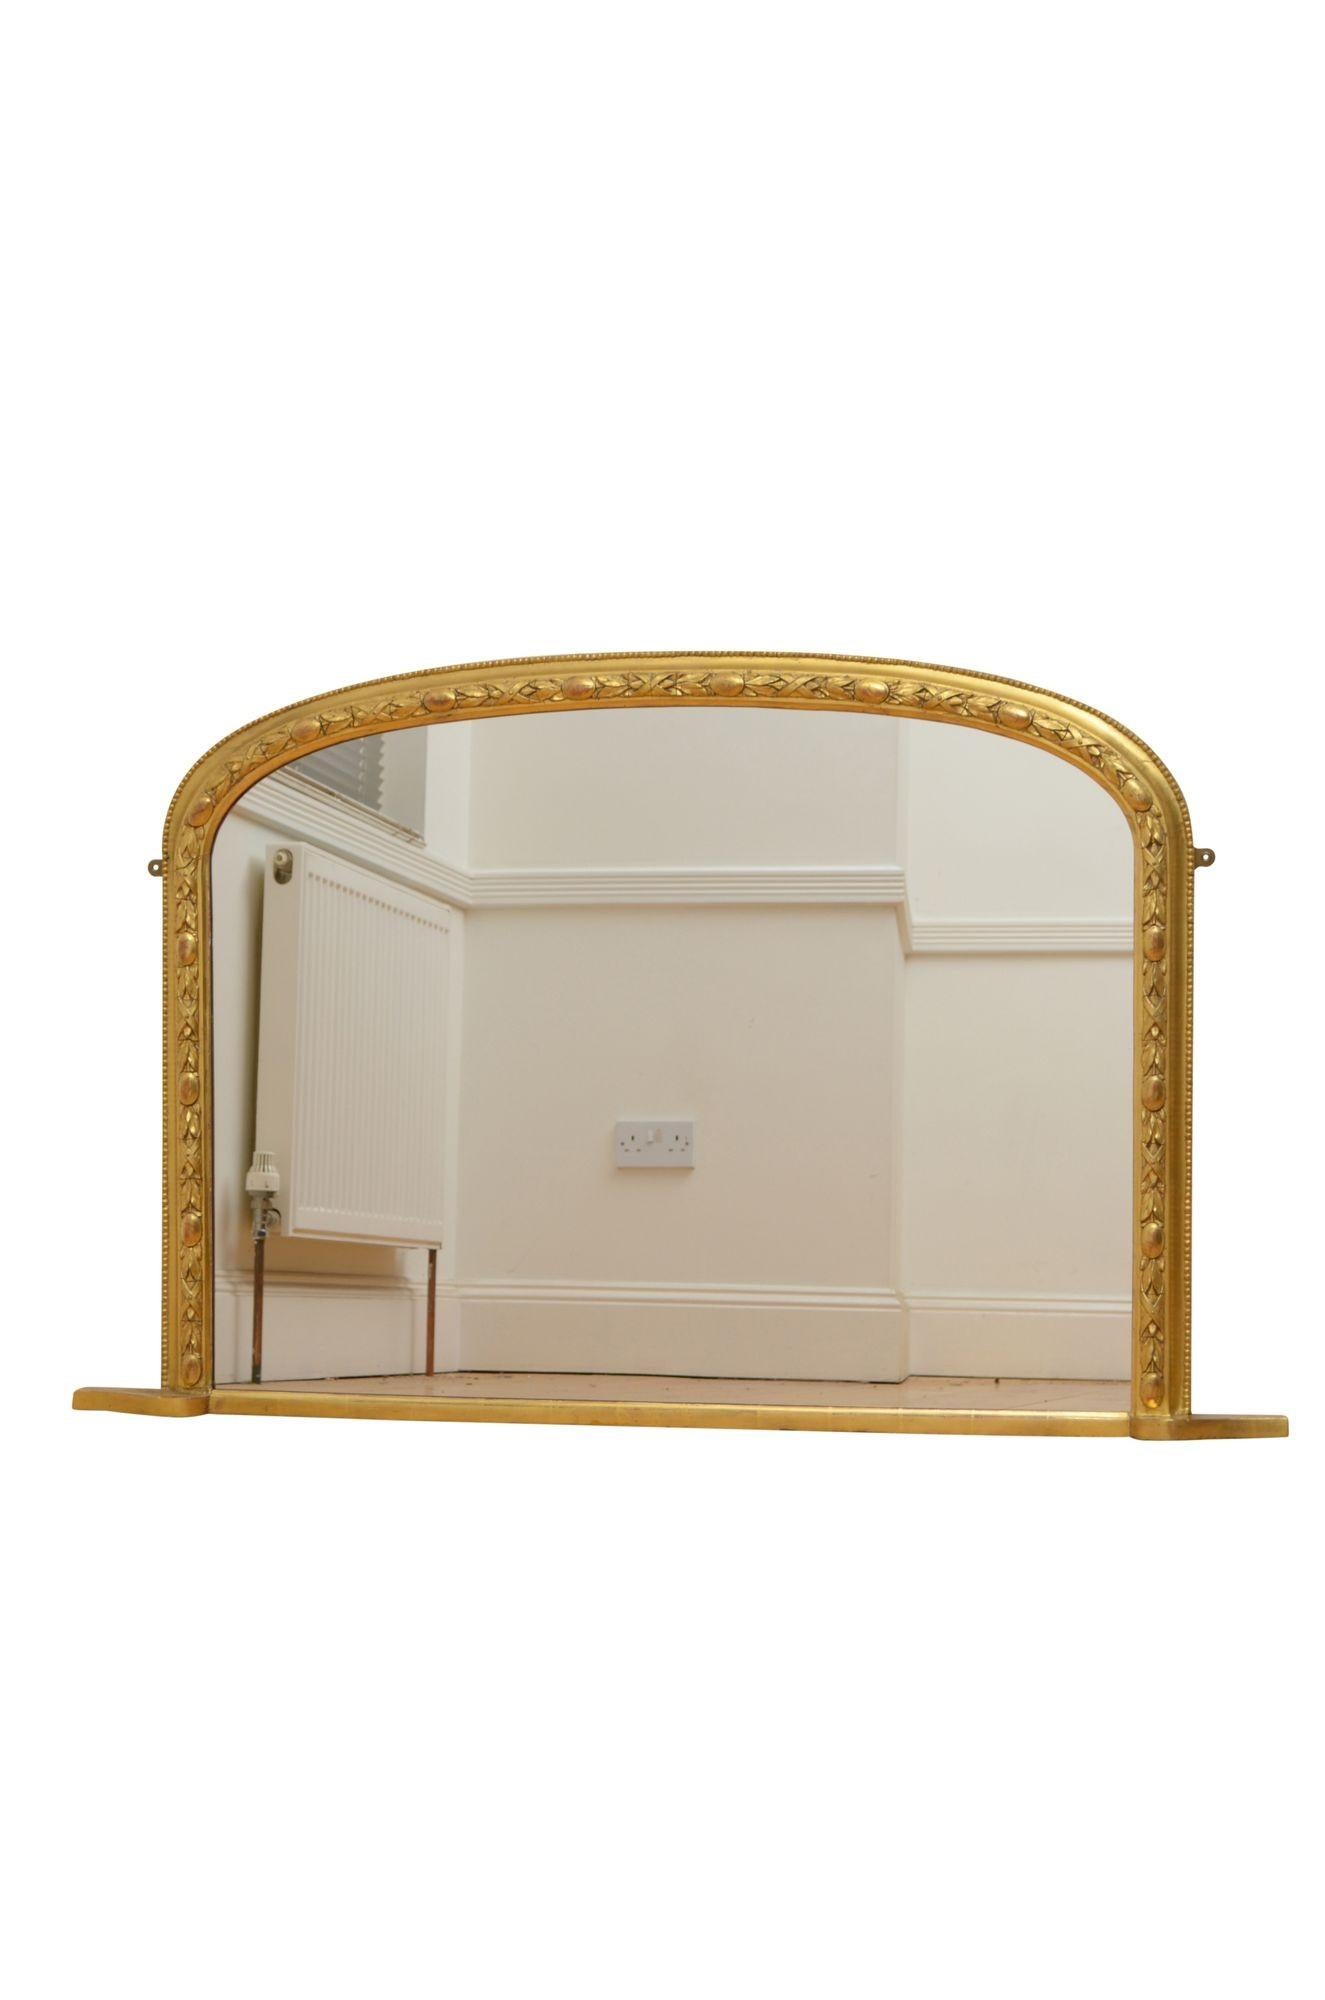 K0599 English Victorian giltwood over mantel mirror or arched form, having replacement mirror in moulded and beaded frame with carved leaf decoration in gold leaf finish. This antique mirror has been signed 8/6/83. Fitted with two hanging brackets